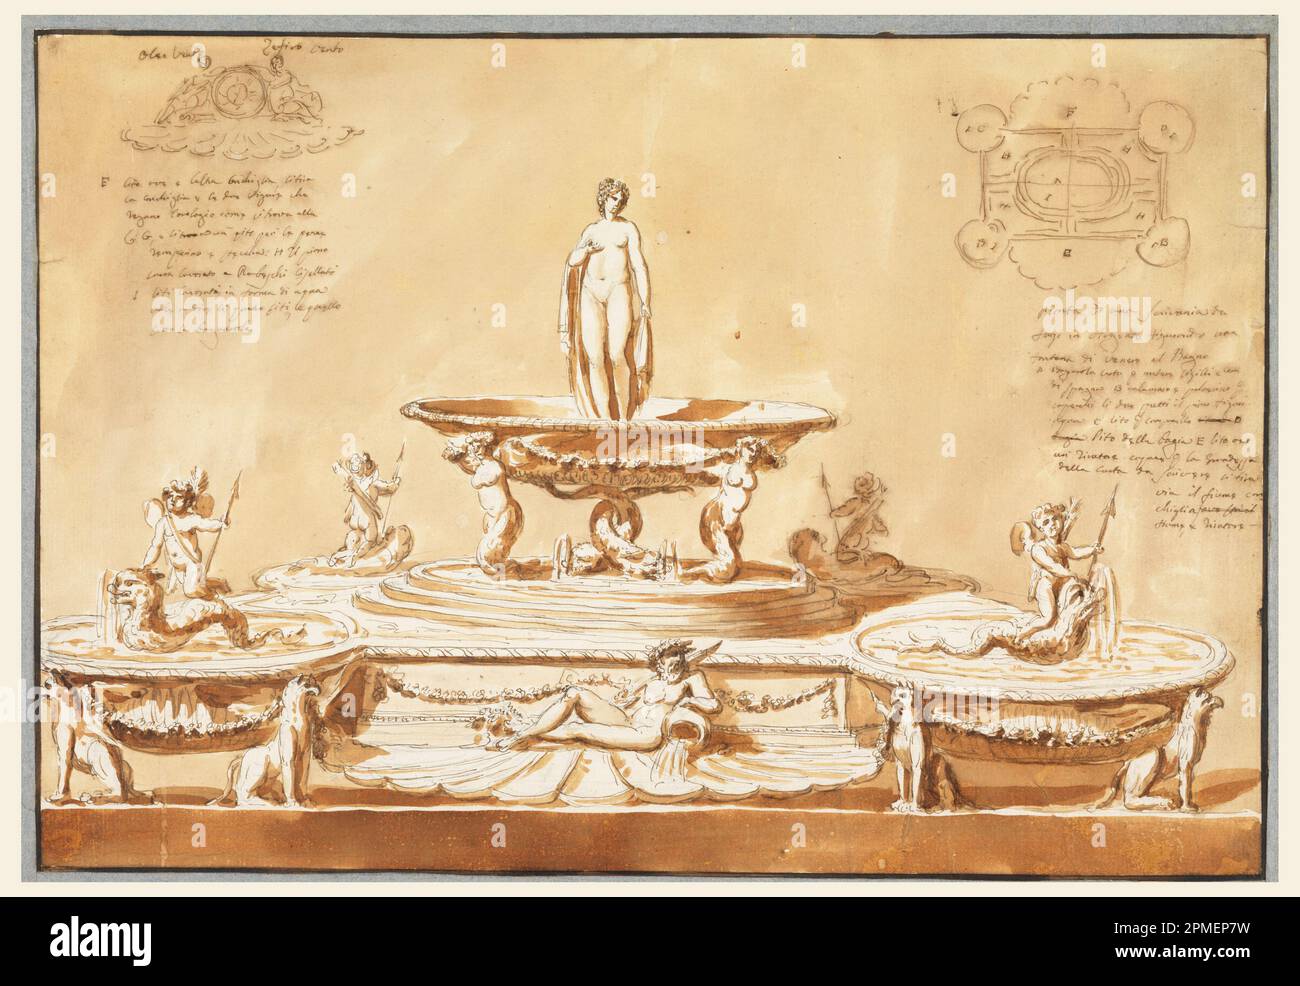 Drawing, Inkstand; Designed by Giuseppe Barberi (Italian, 1746–1809); Italy; pen and brown ink, brush and brown wash, graphite on off-white laid paper; Image: 30.7 x 44.9 cm (12 1/16 x 17 11/16 in.) Mat: 40.6 x 55.9 cm (16 x 22 in.) Frame H x W x D: 44.8 x 60.3 x 2.5 cm (17 5/8 in. x 23 3/4 in. x 1 in.) Mount: 34.1 x 45.7 cm (13 7/16 in. x 18 in.) Stock Photo